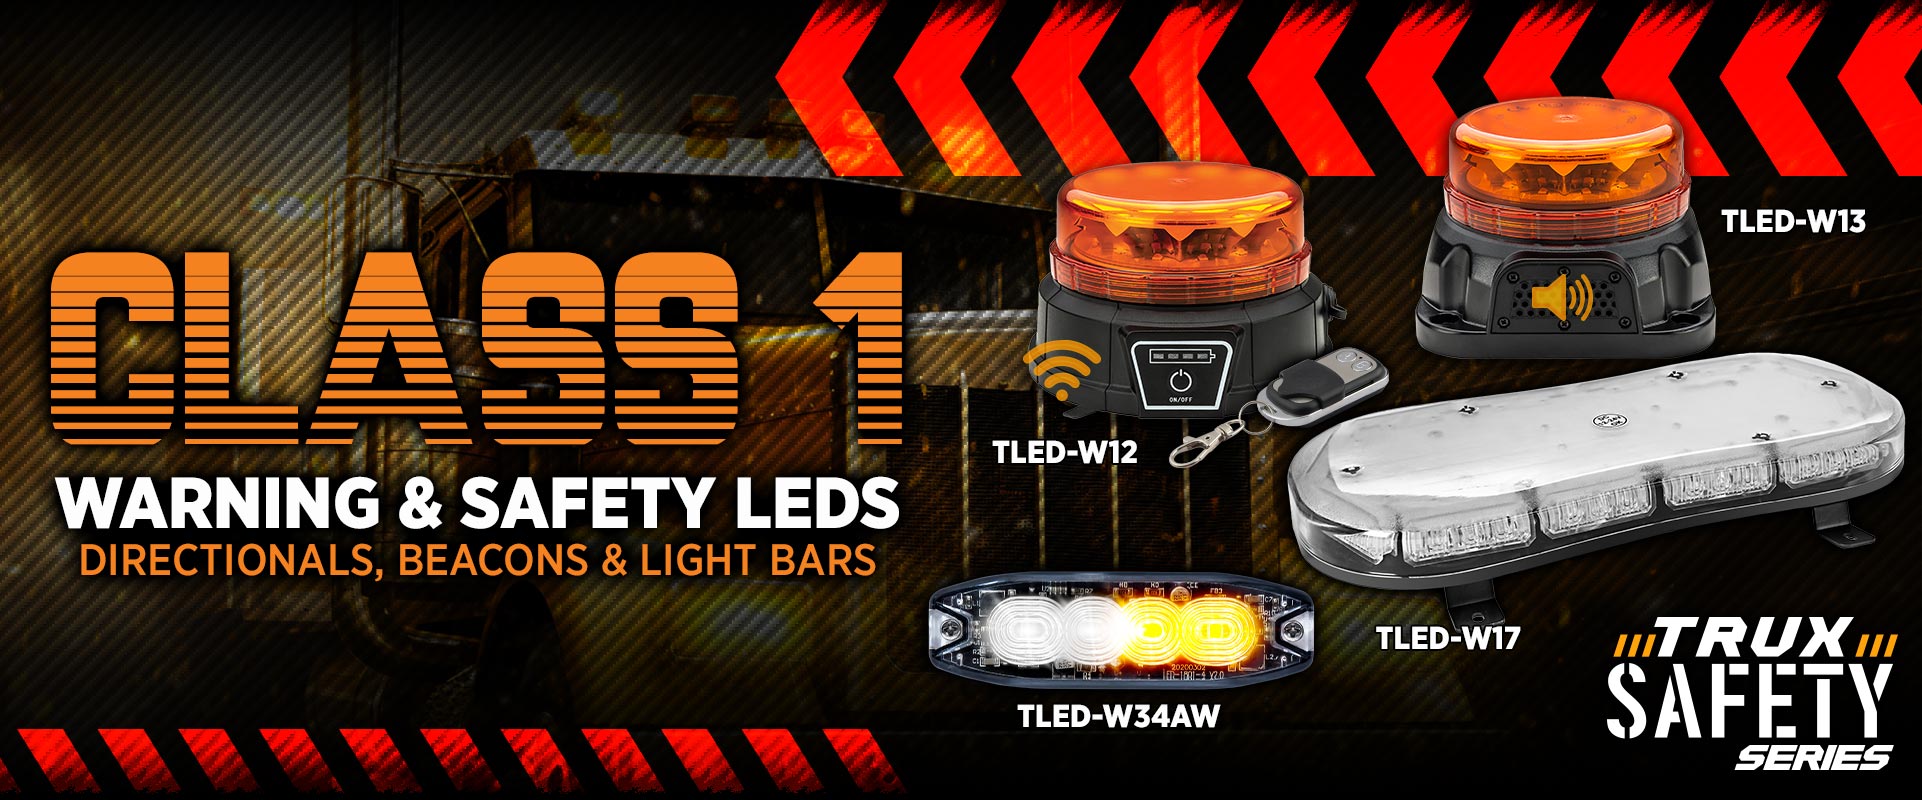 https://truxaccessories.com/wp-content/uploads/Warning-Safety-LEDs.jpg